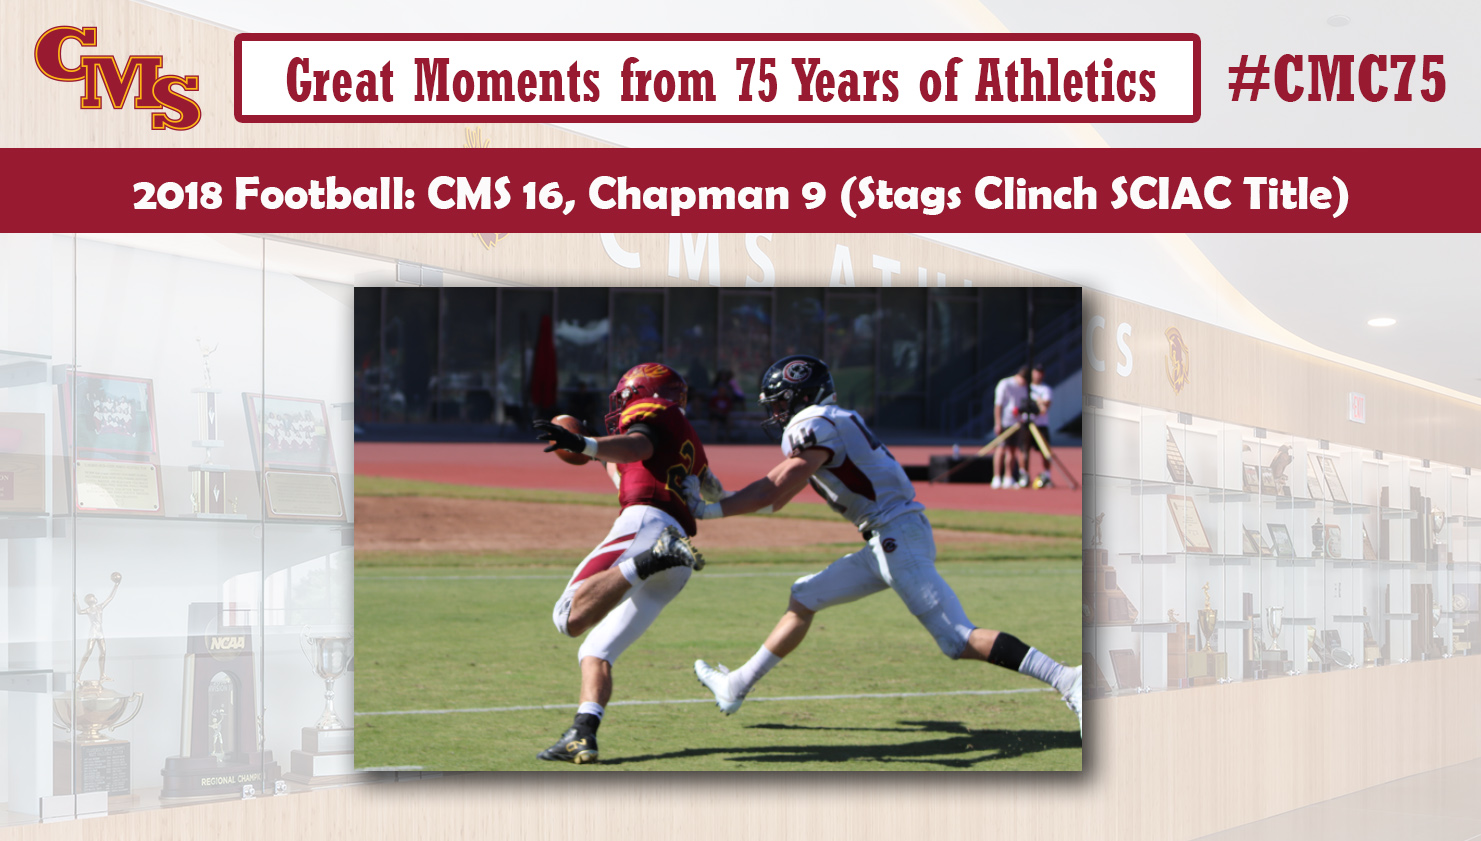 Garrett Cheadle scoring a touchdown against Chapman. Words read: Great Moments from 75 Years of Athletics, 2018 Football: CMS 16, Chapman 9 (Stags Clinch SCIAC Title)